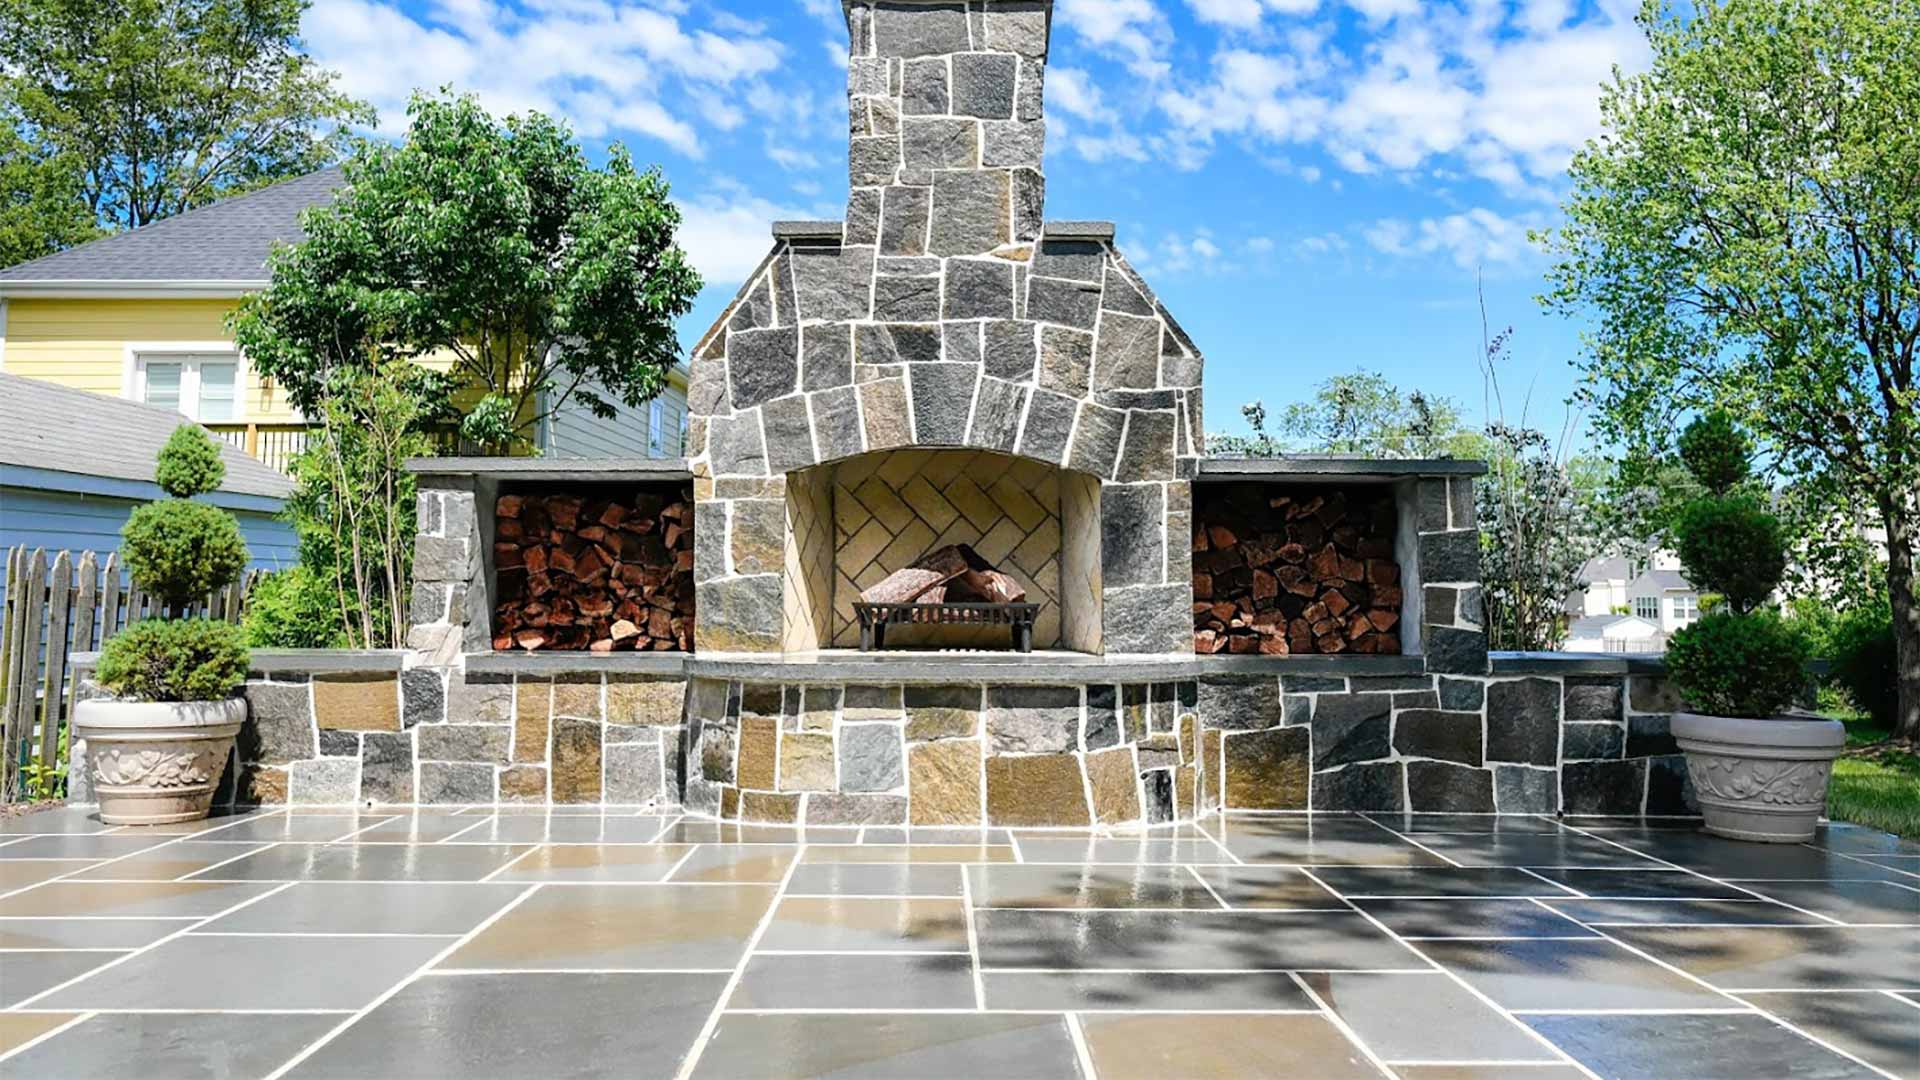 Custom outdoor fireplace installed at a home in Bristow, VA.